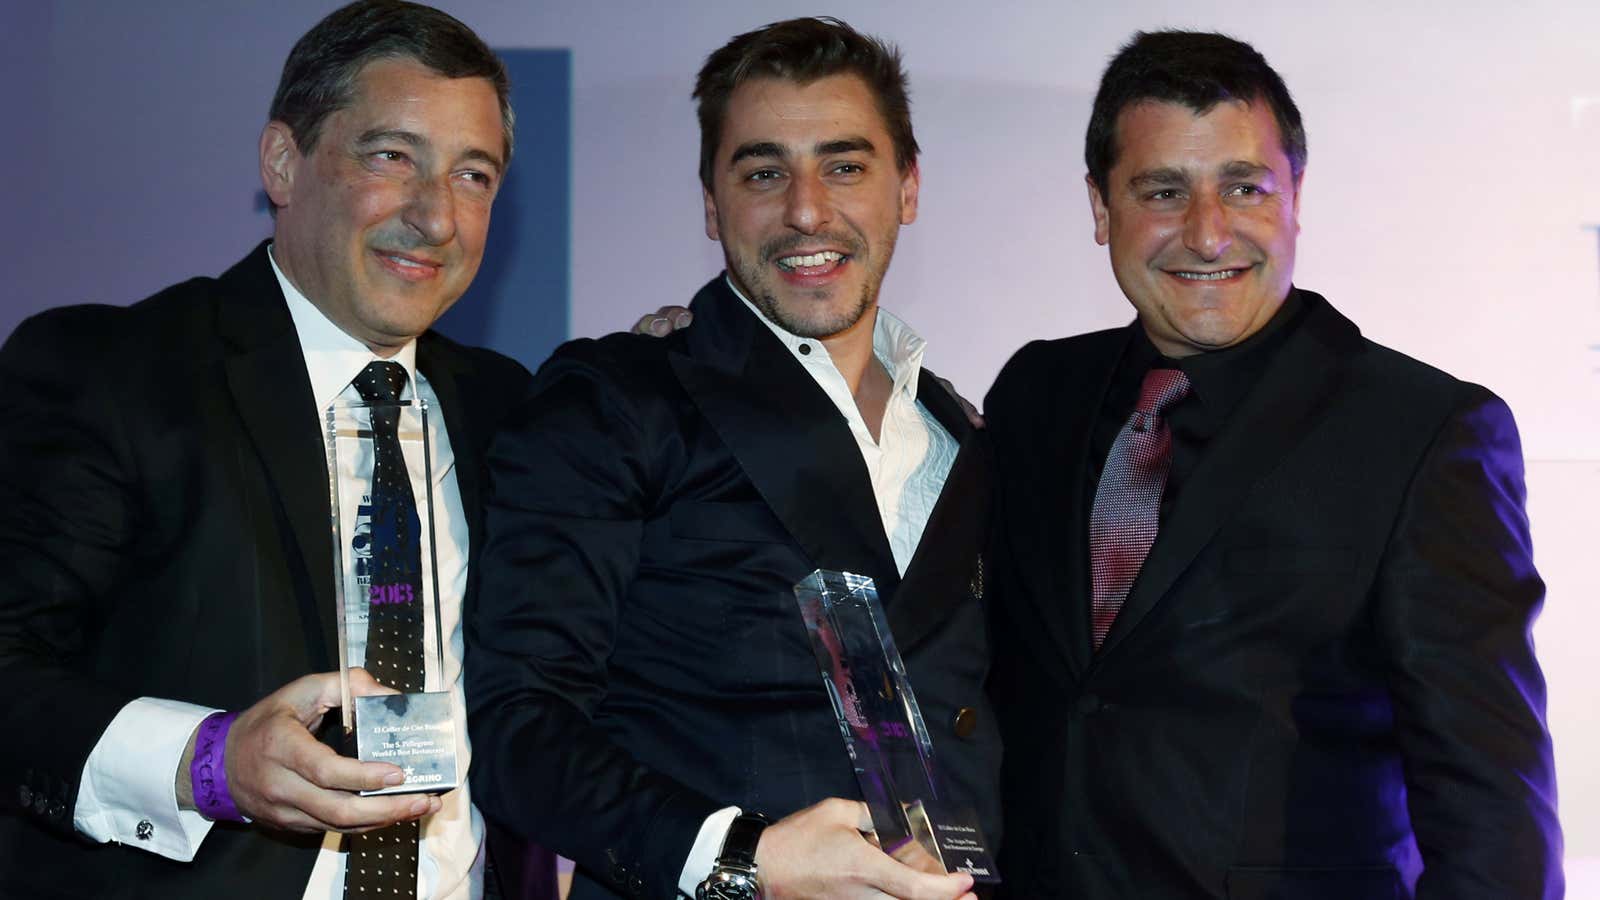 The brothers Roca, whose El Celler de Can Roca restaurant was just named the world’s finest.